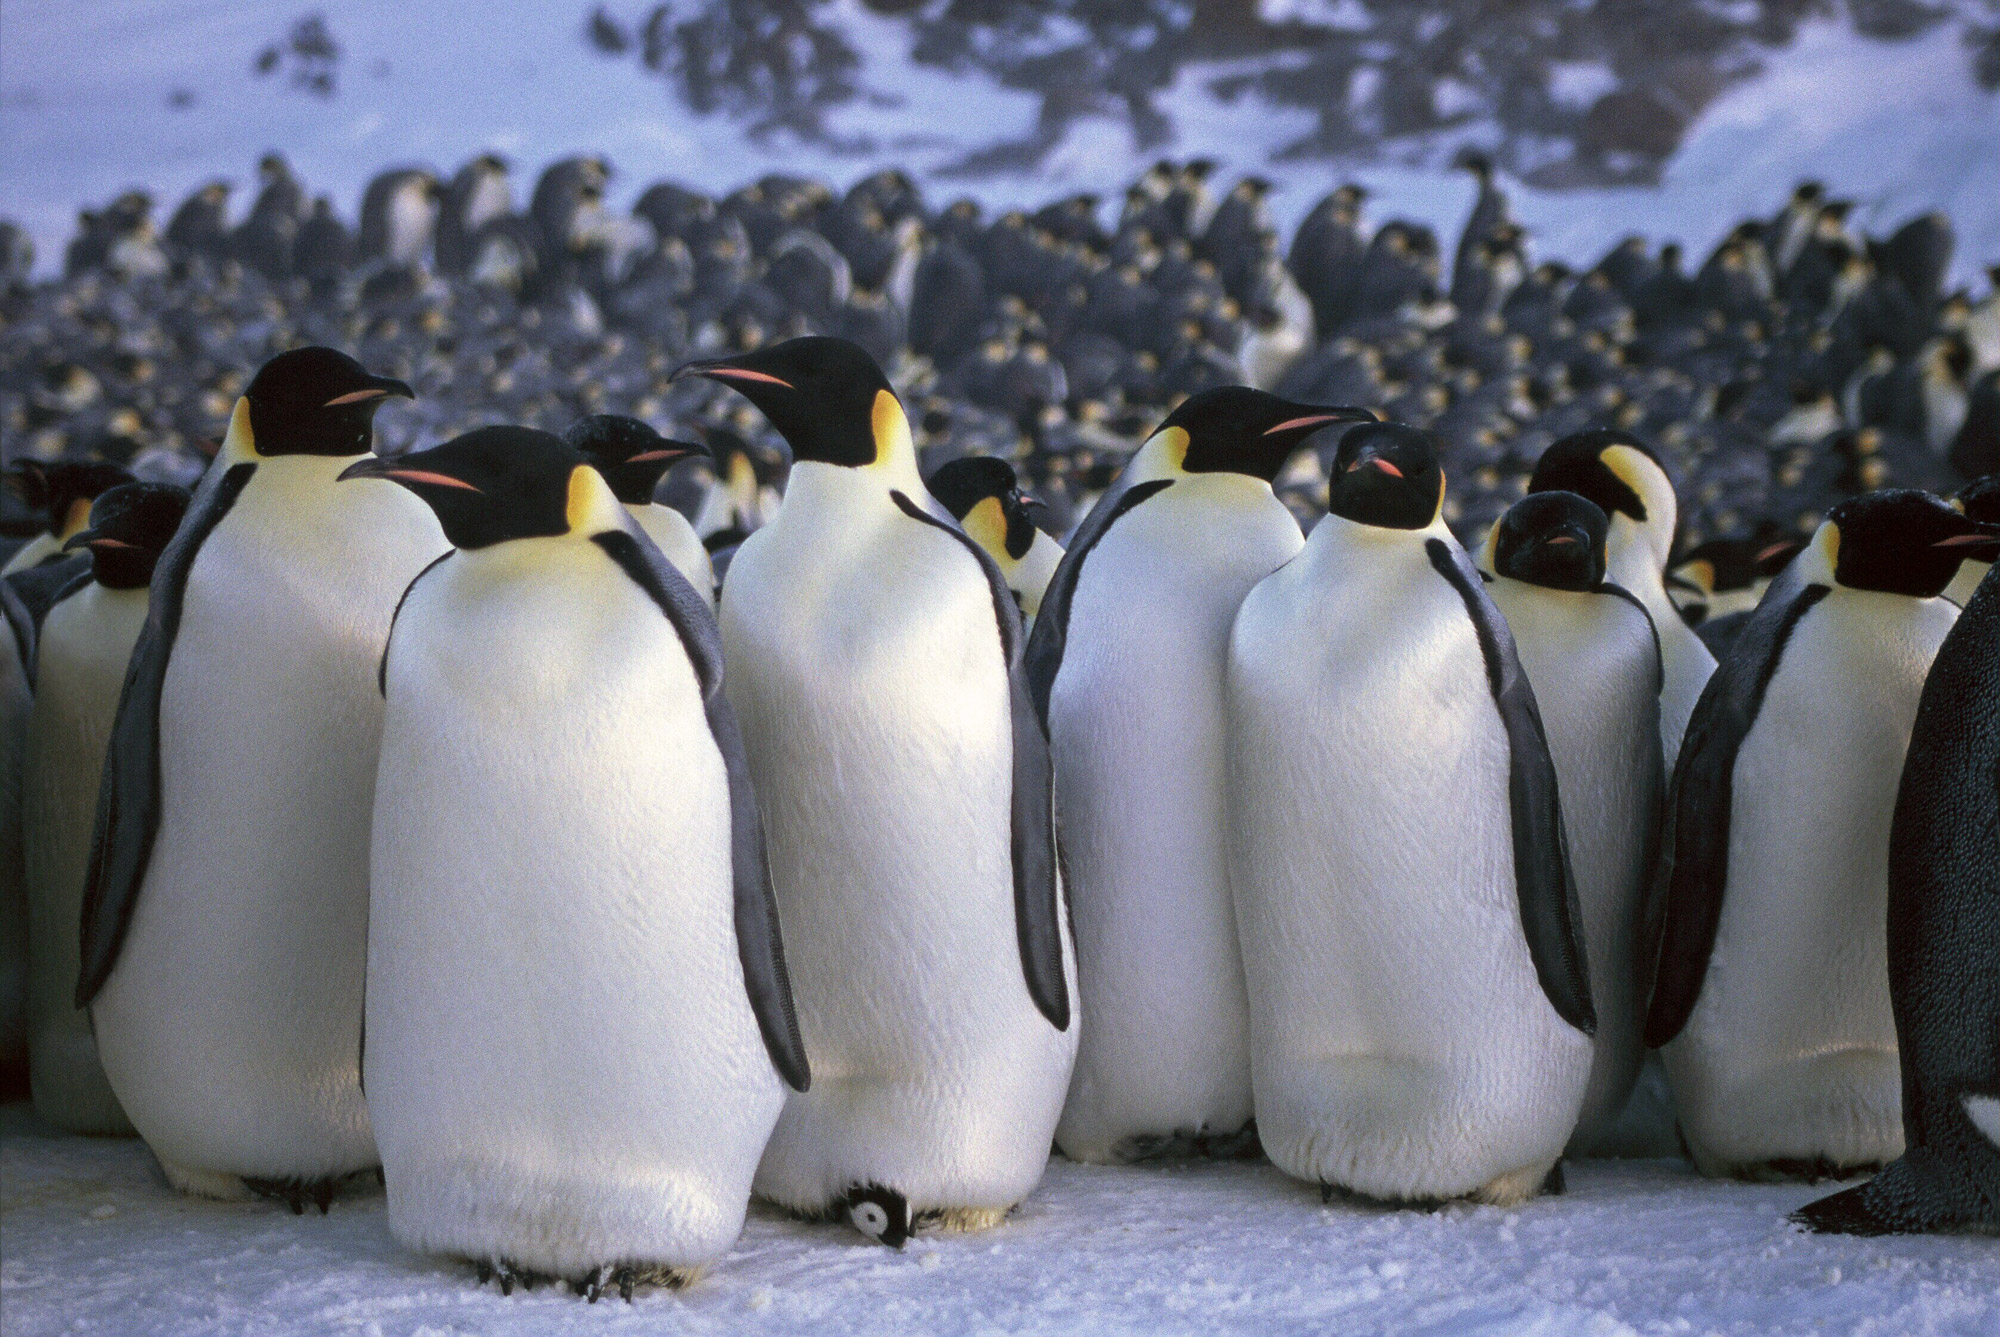 How do penguins stay warm and other adaptions to their environment